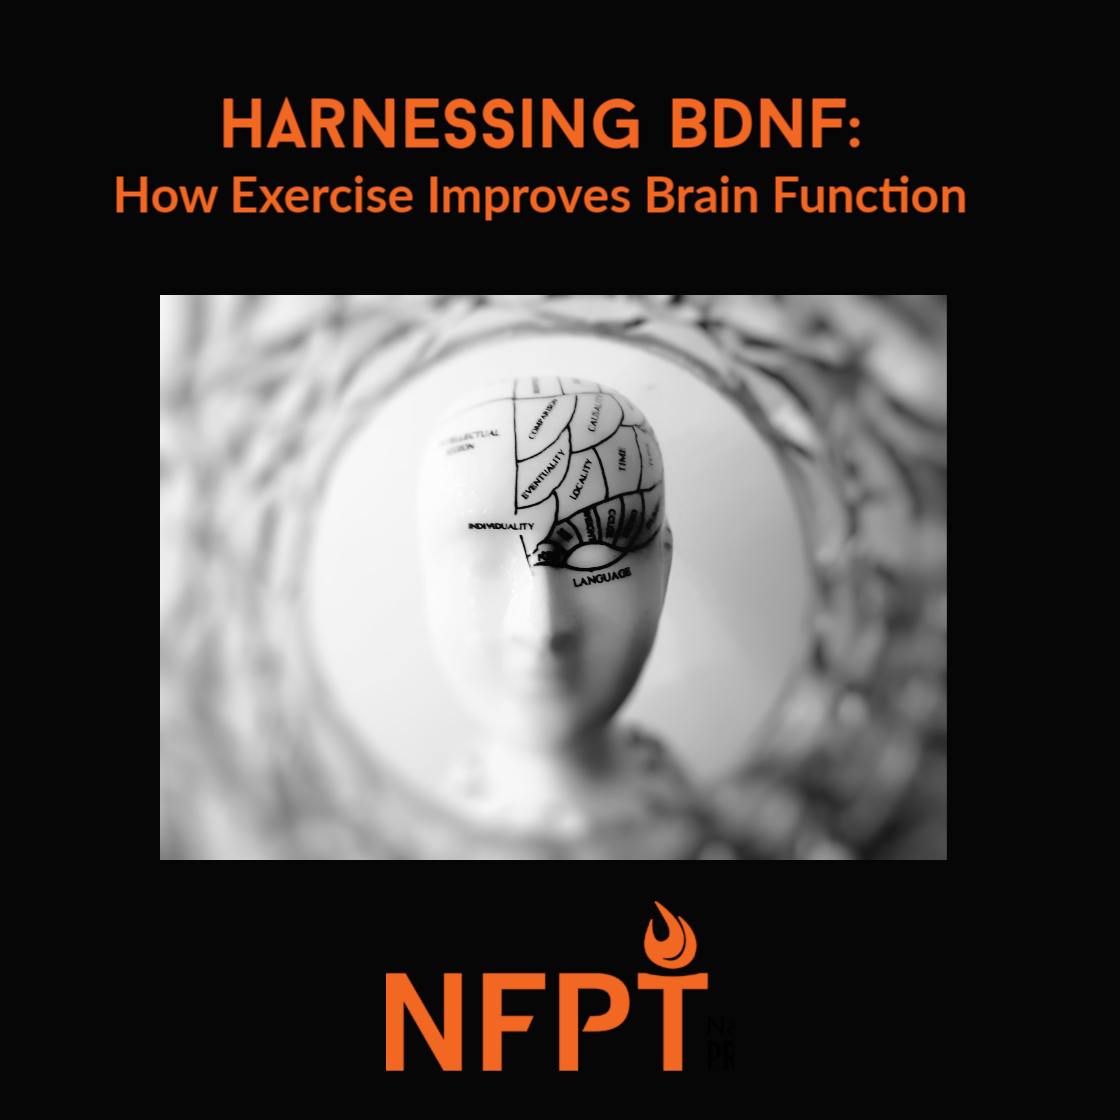 Harnessing BDNF: How Exercise Can Improve Brain Function